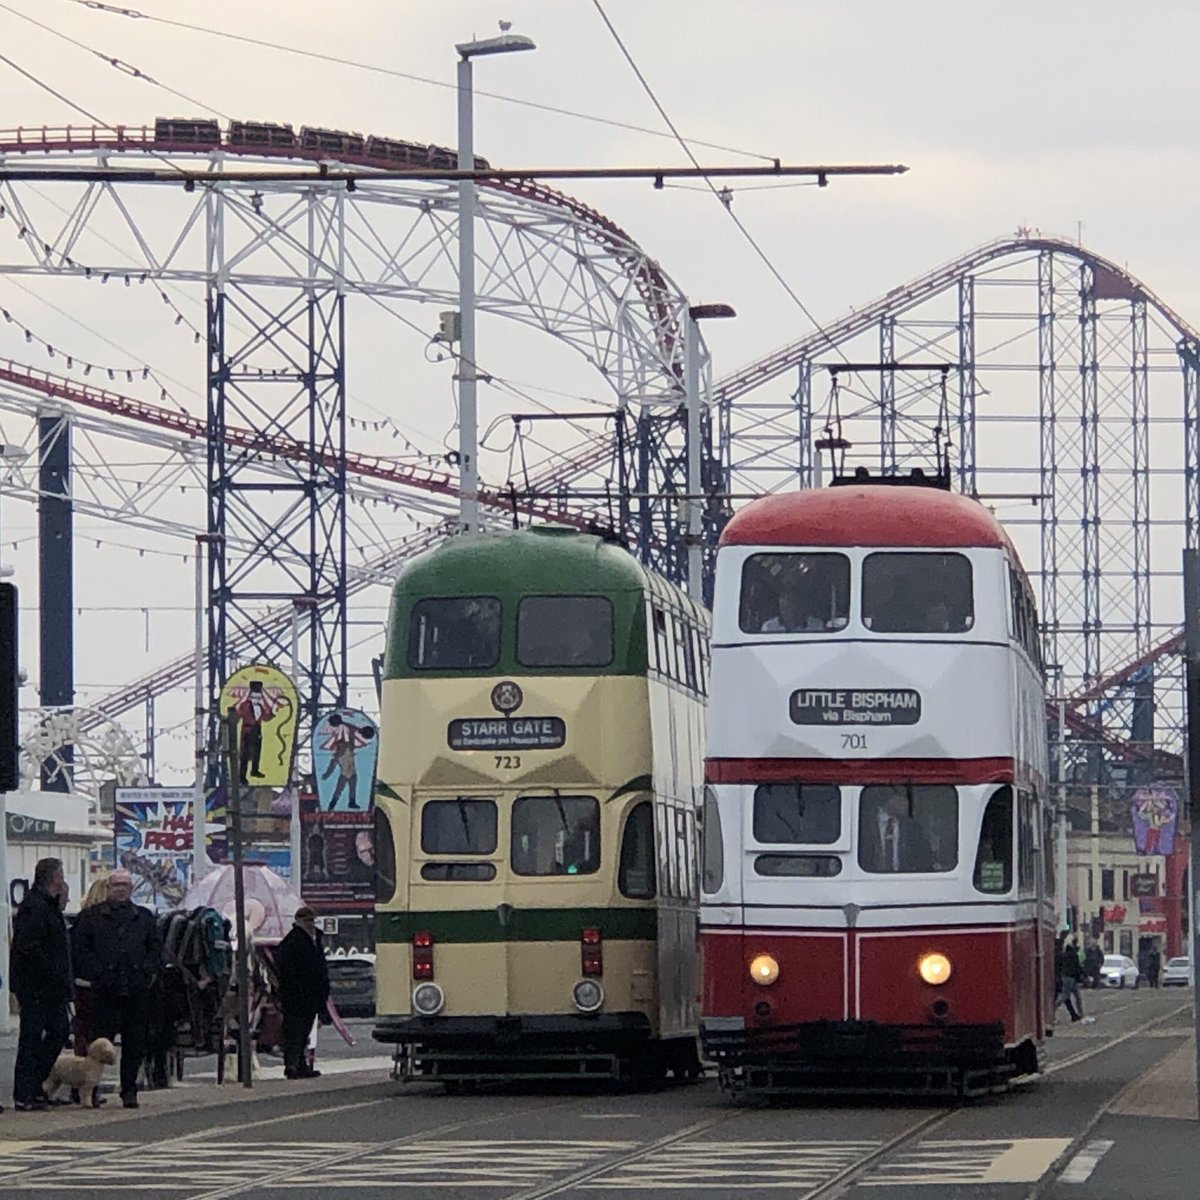 Stop before you go further. 
We’re living on a roller coaster. 
See the bigger picture. 
Now we’re all richer! @jamesloyart #streetphotography #photography #blackpool #tram #rollercoaster #blackpoolpleasurebeach #red #green #stop #go #ride #promenade @blackpoolheritage #thoughts